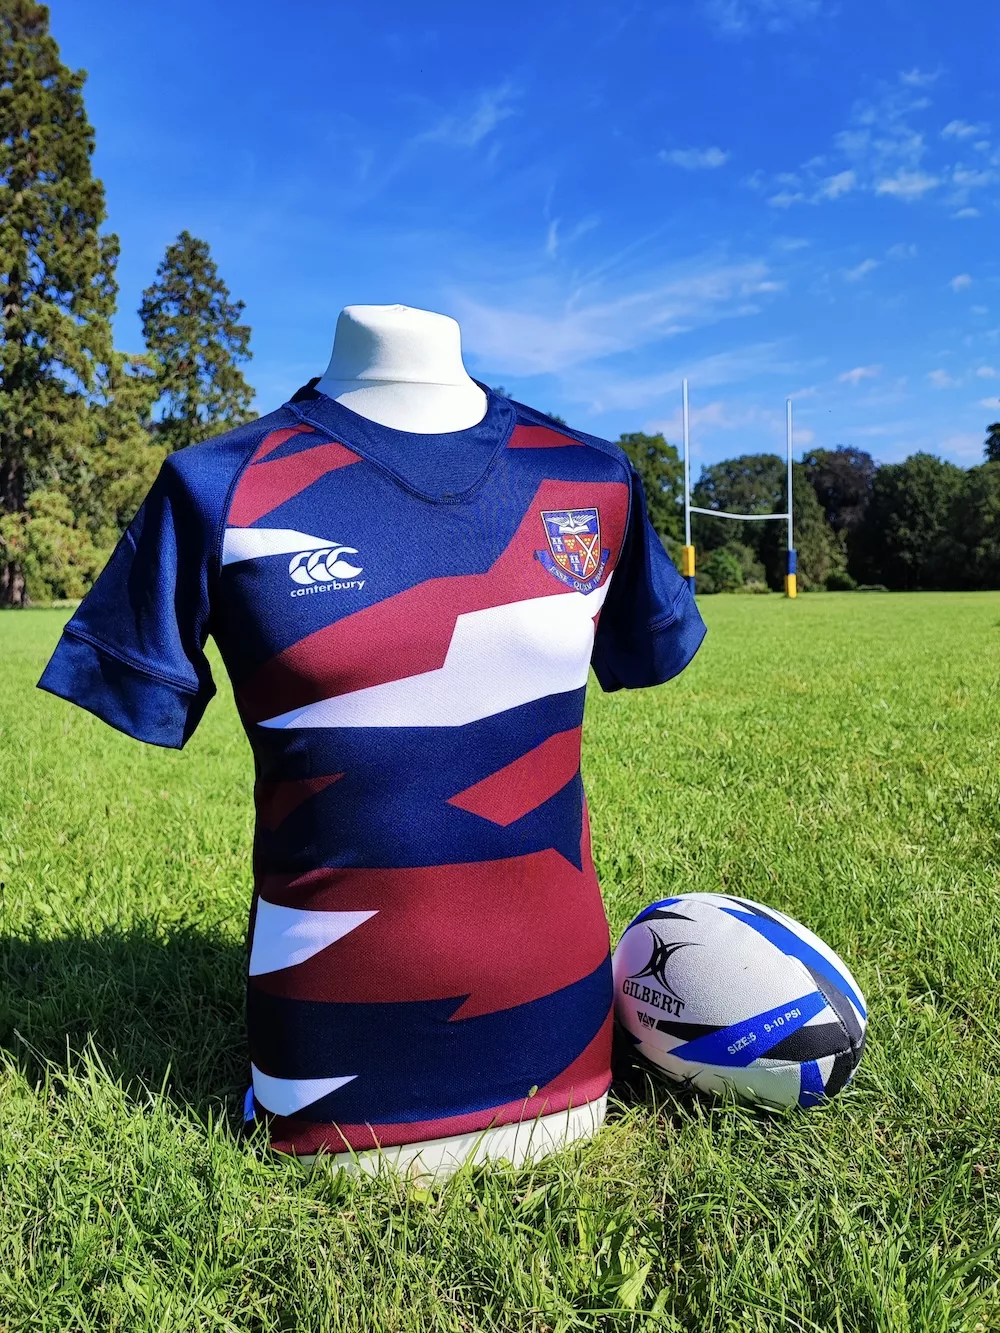 Rugby Shirt In front of Posts.jpg